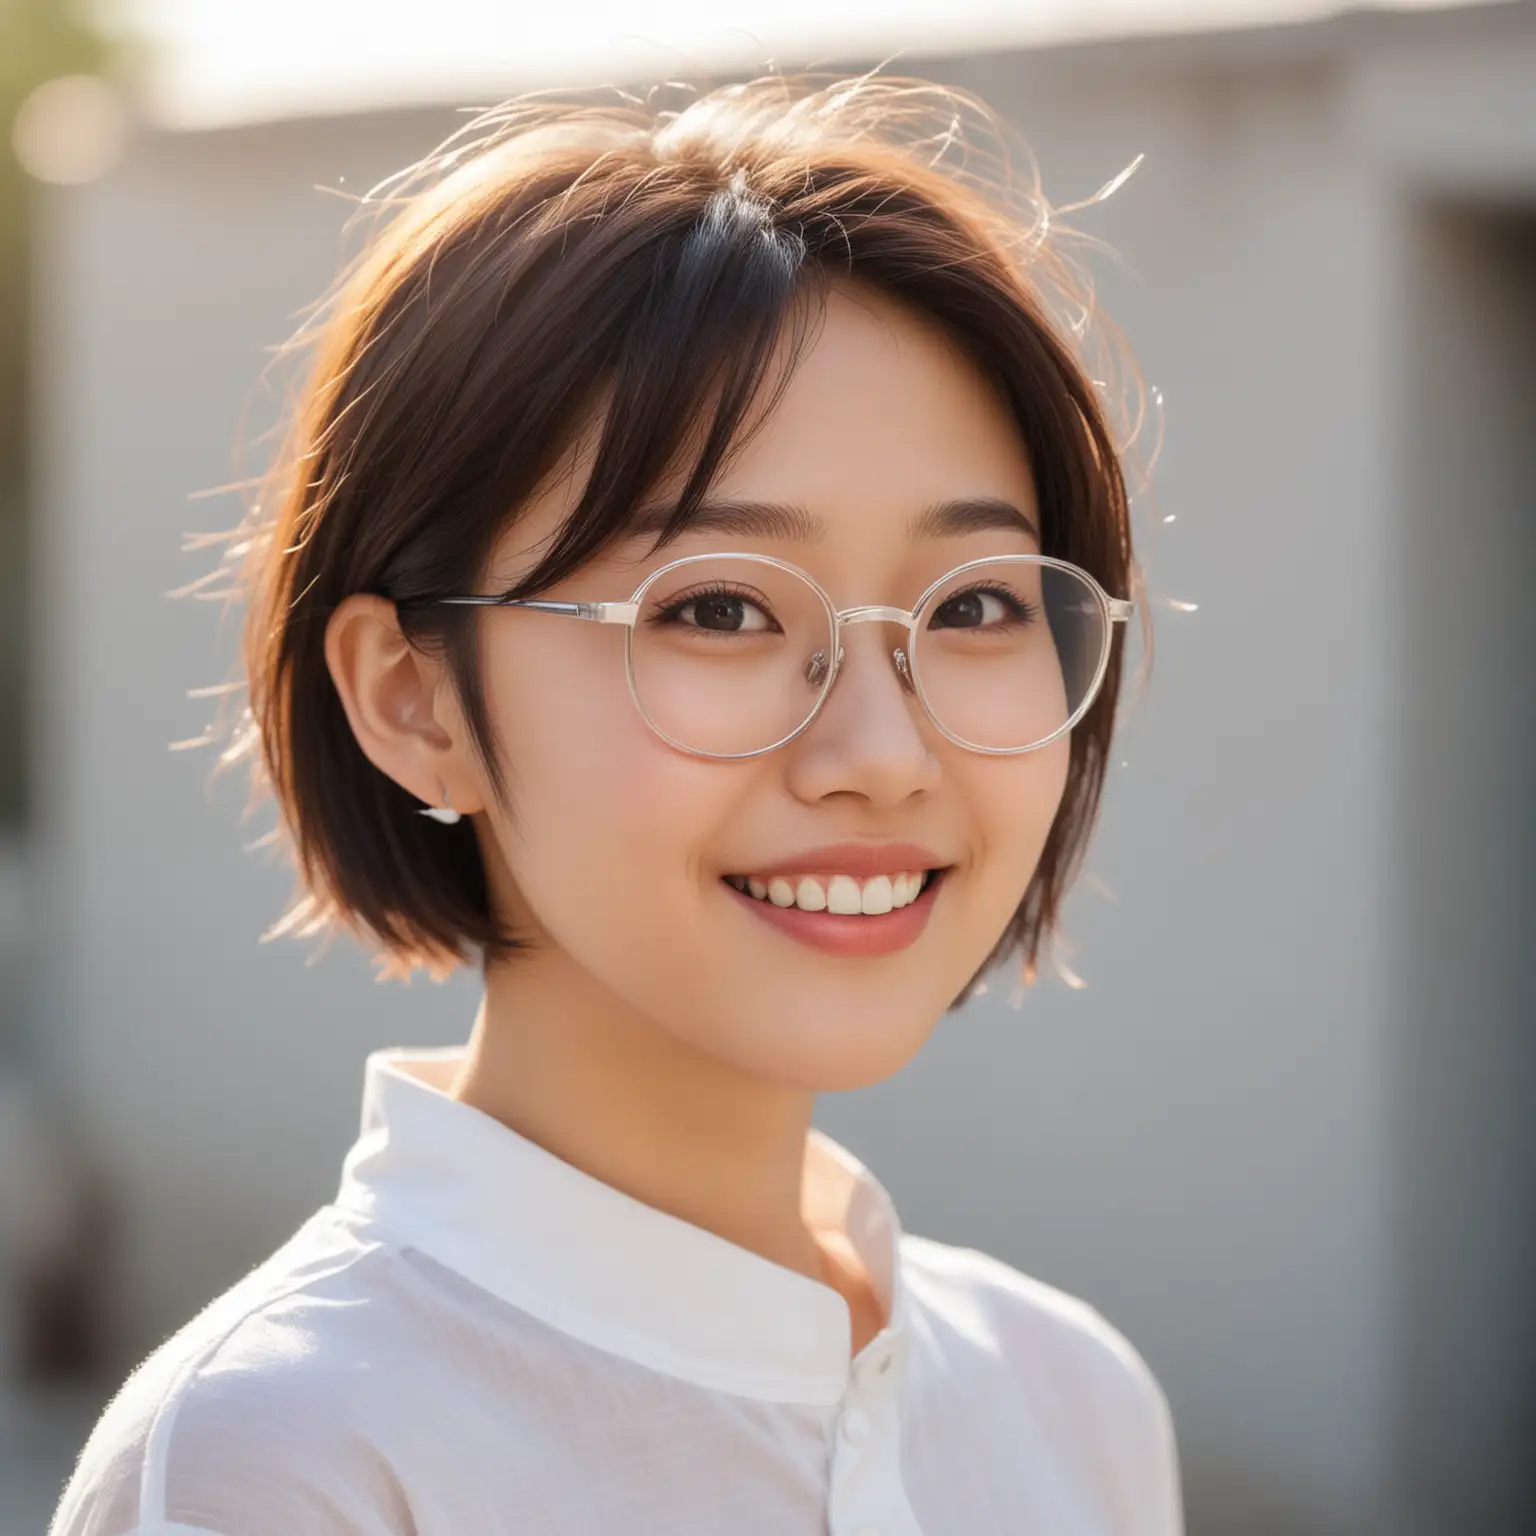 Chinese girl, wearing white clothes, wearing glasses, short hair, sunny smile, side profile